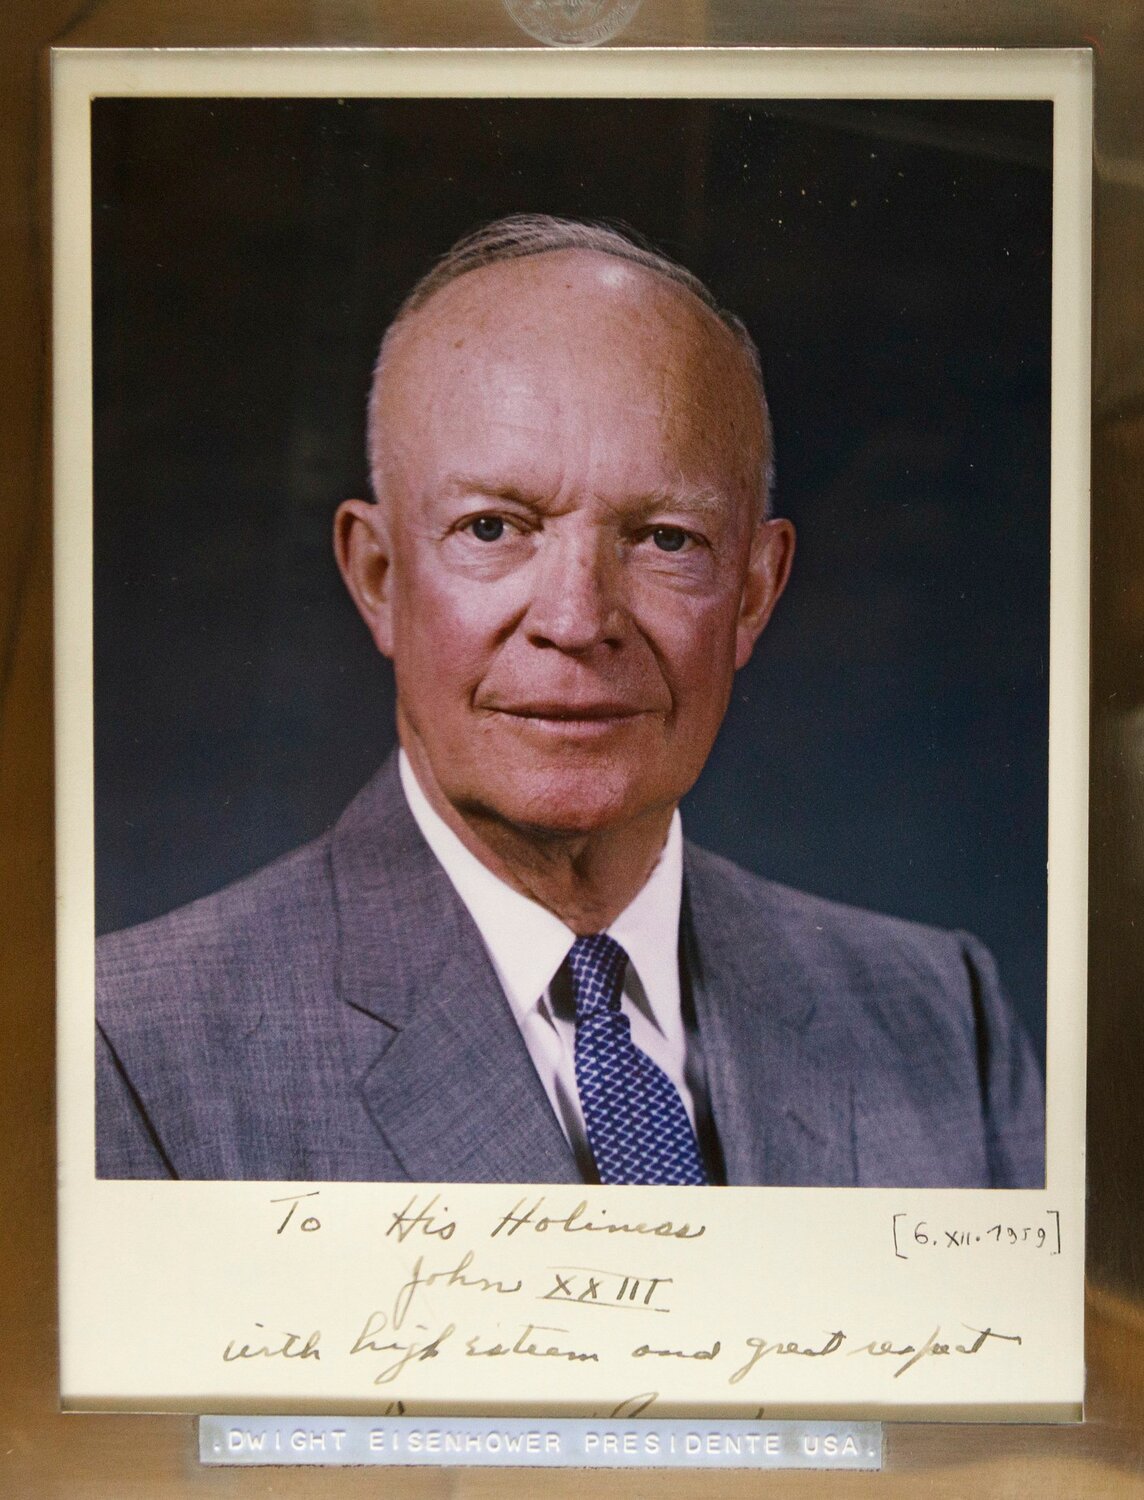 U.S. President Dwight D. Eisenhower gave this signed photograph of himself to Blessed John XXIII during their meeting at the Vatican Dec. 6, 1959. The photo is conserved in a museum at the pontiff's birthplace in Sotto il Monte Giovanni XXIII, Italy.